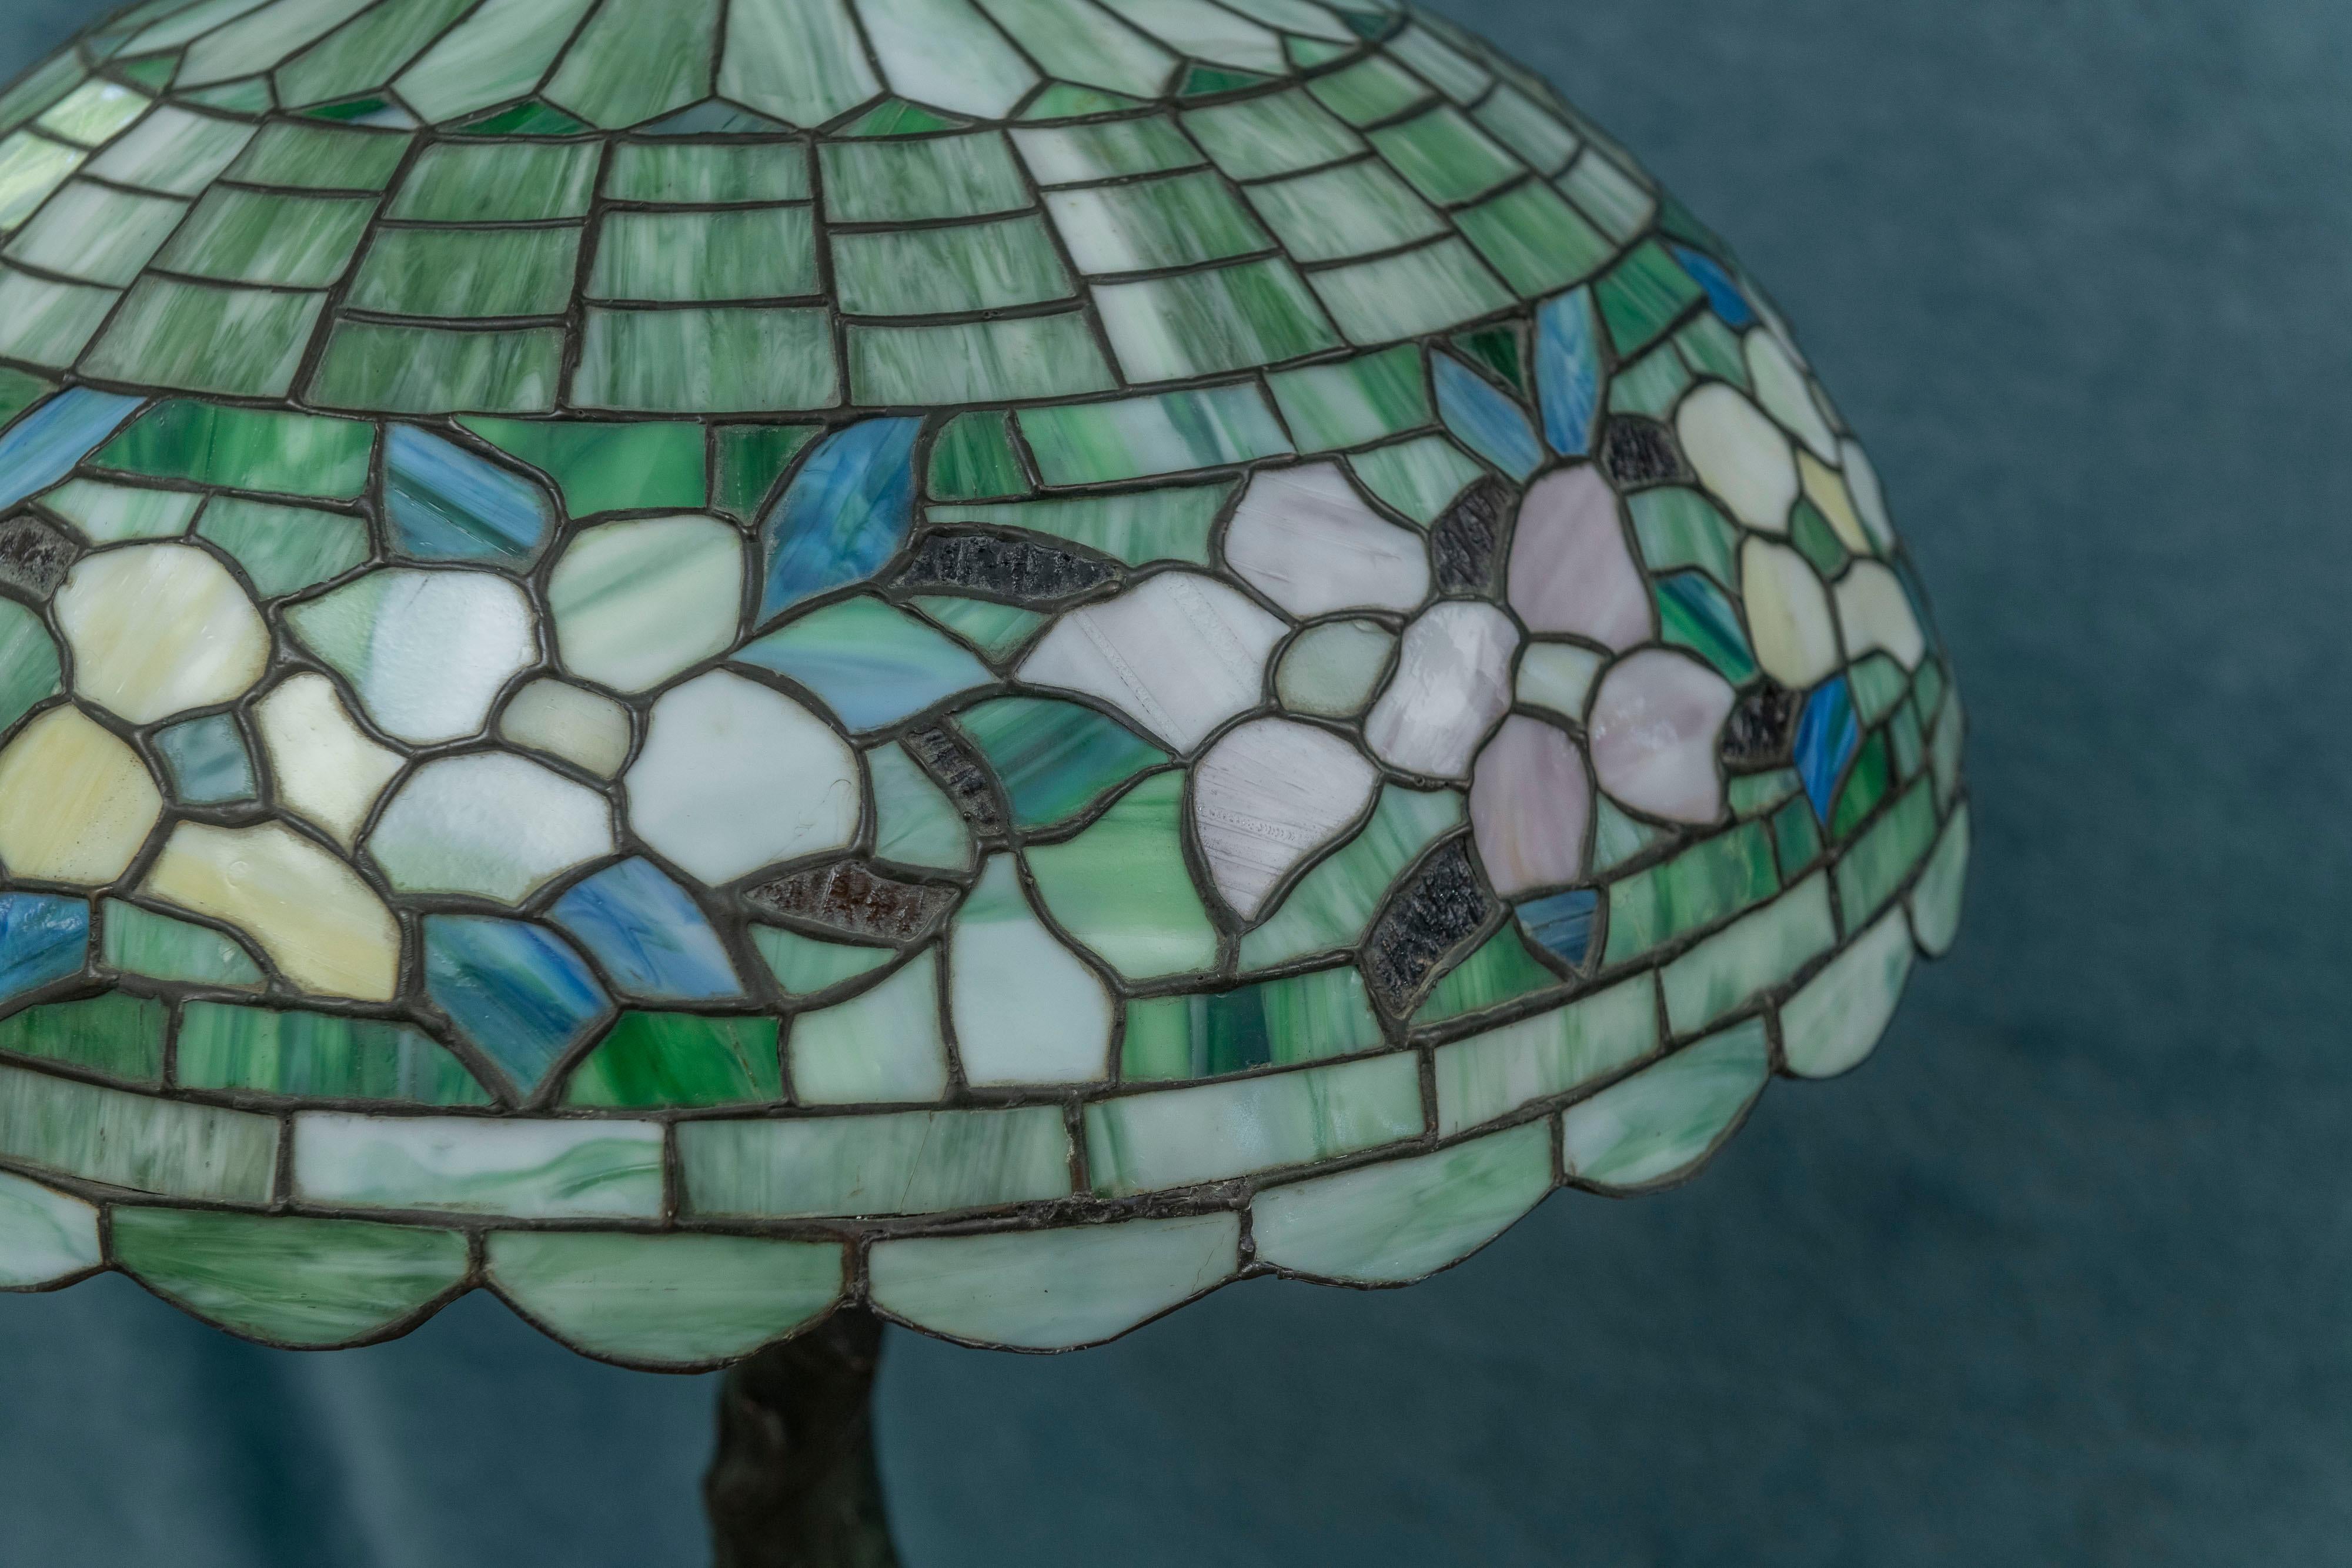 Metal Large Antique Leaded Glass Table Lamp by Wilkinson Co. B'klyn N.Y ca. 1910 For Sale